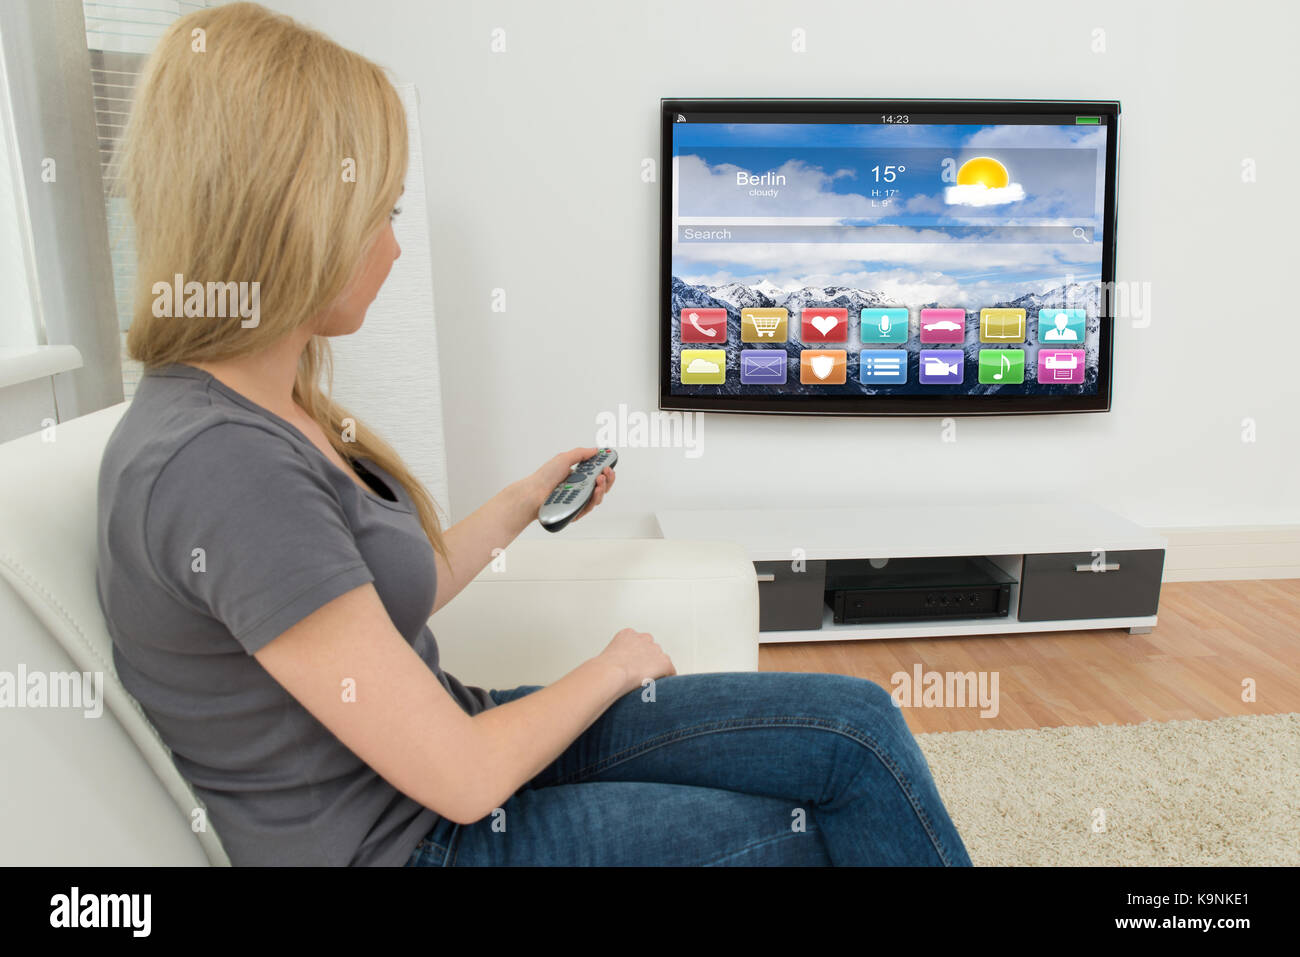 Young Woman On Sofa Holding Remote Control In Front Of Television With Apps Stock Photo